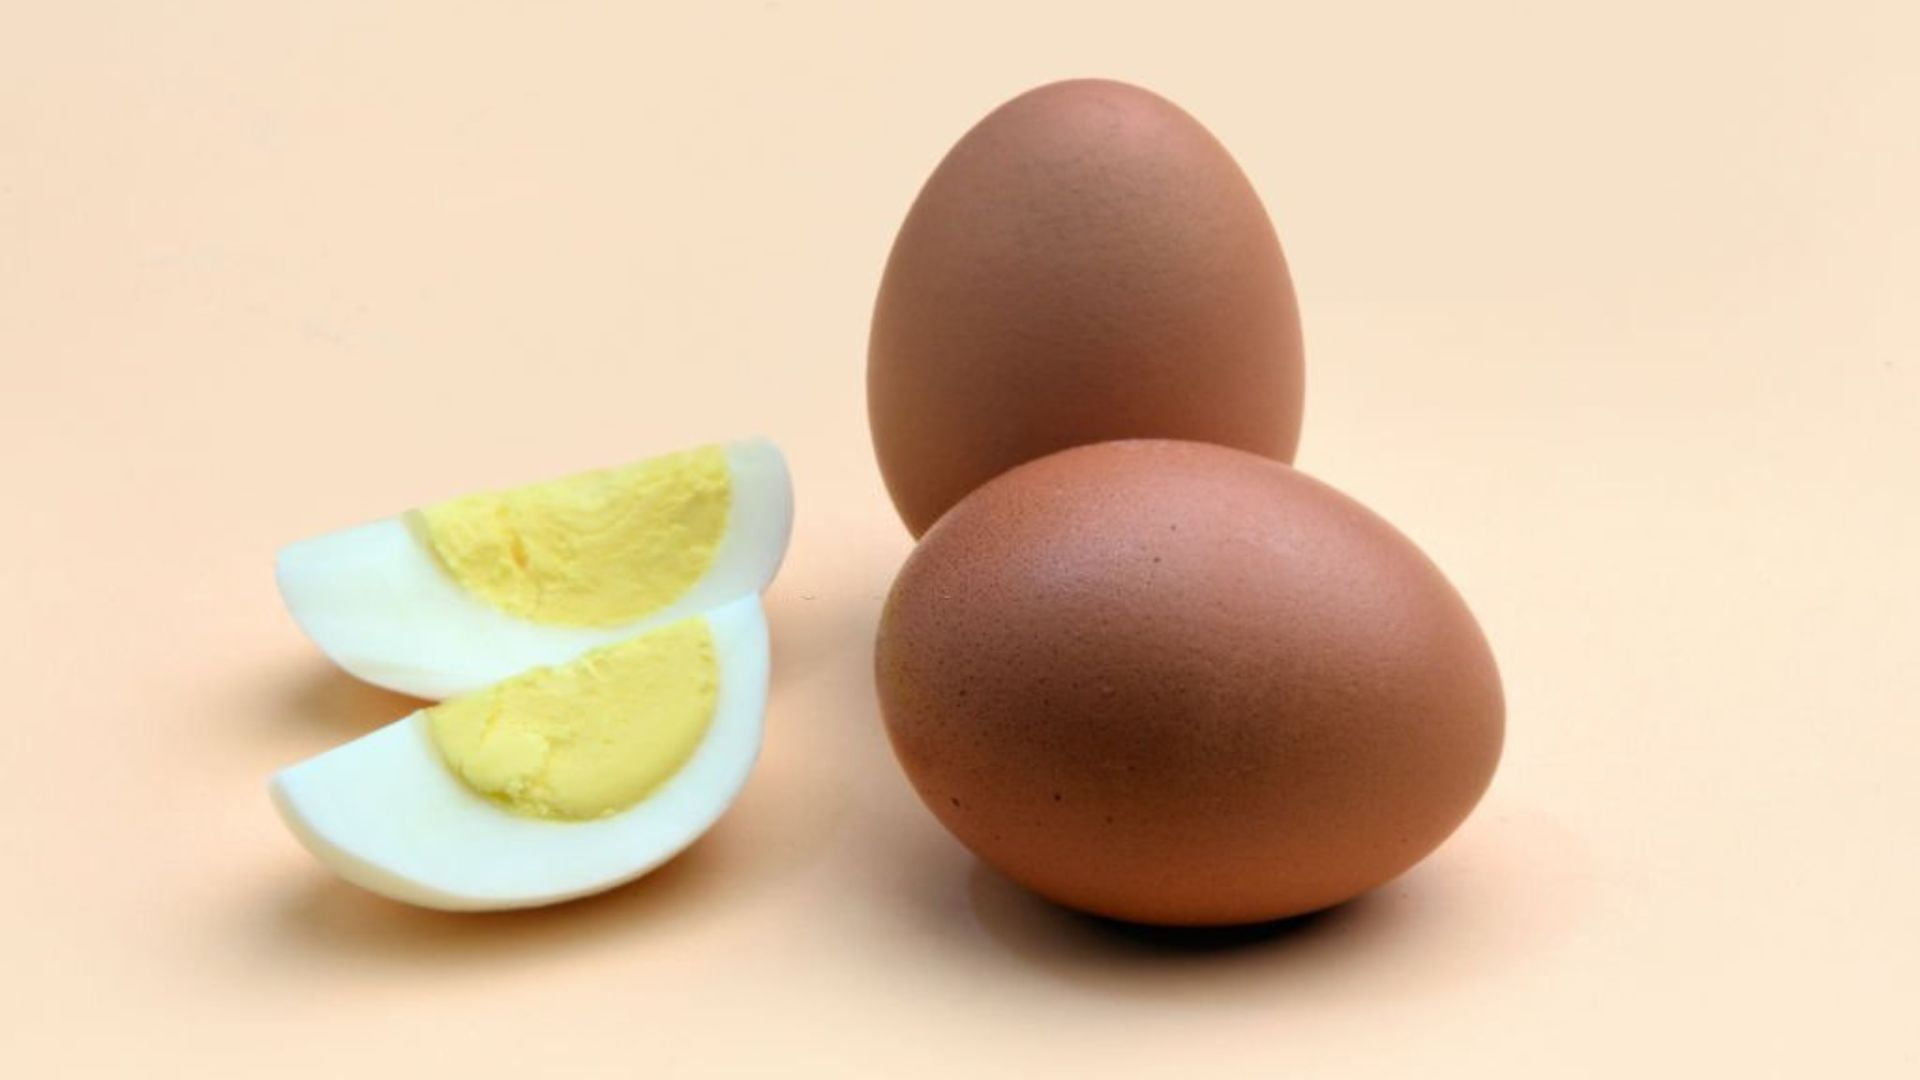 Lose Weight and Feel Great with the Hard Boiled Egg Diet!